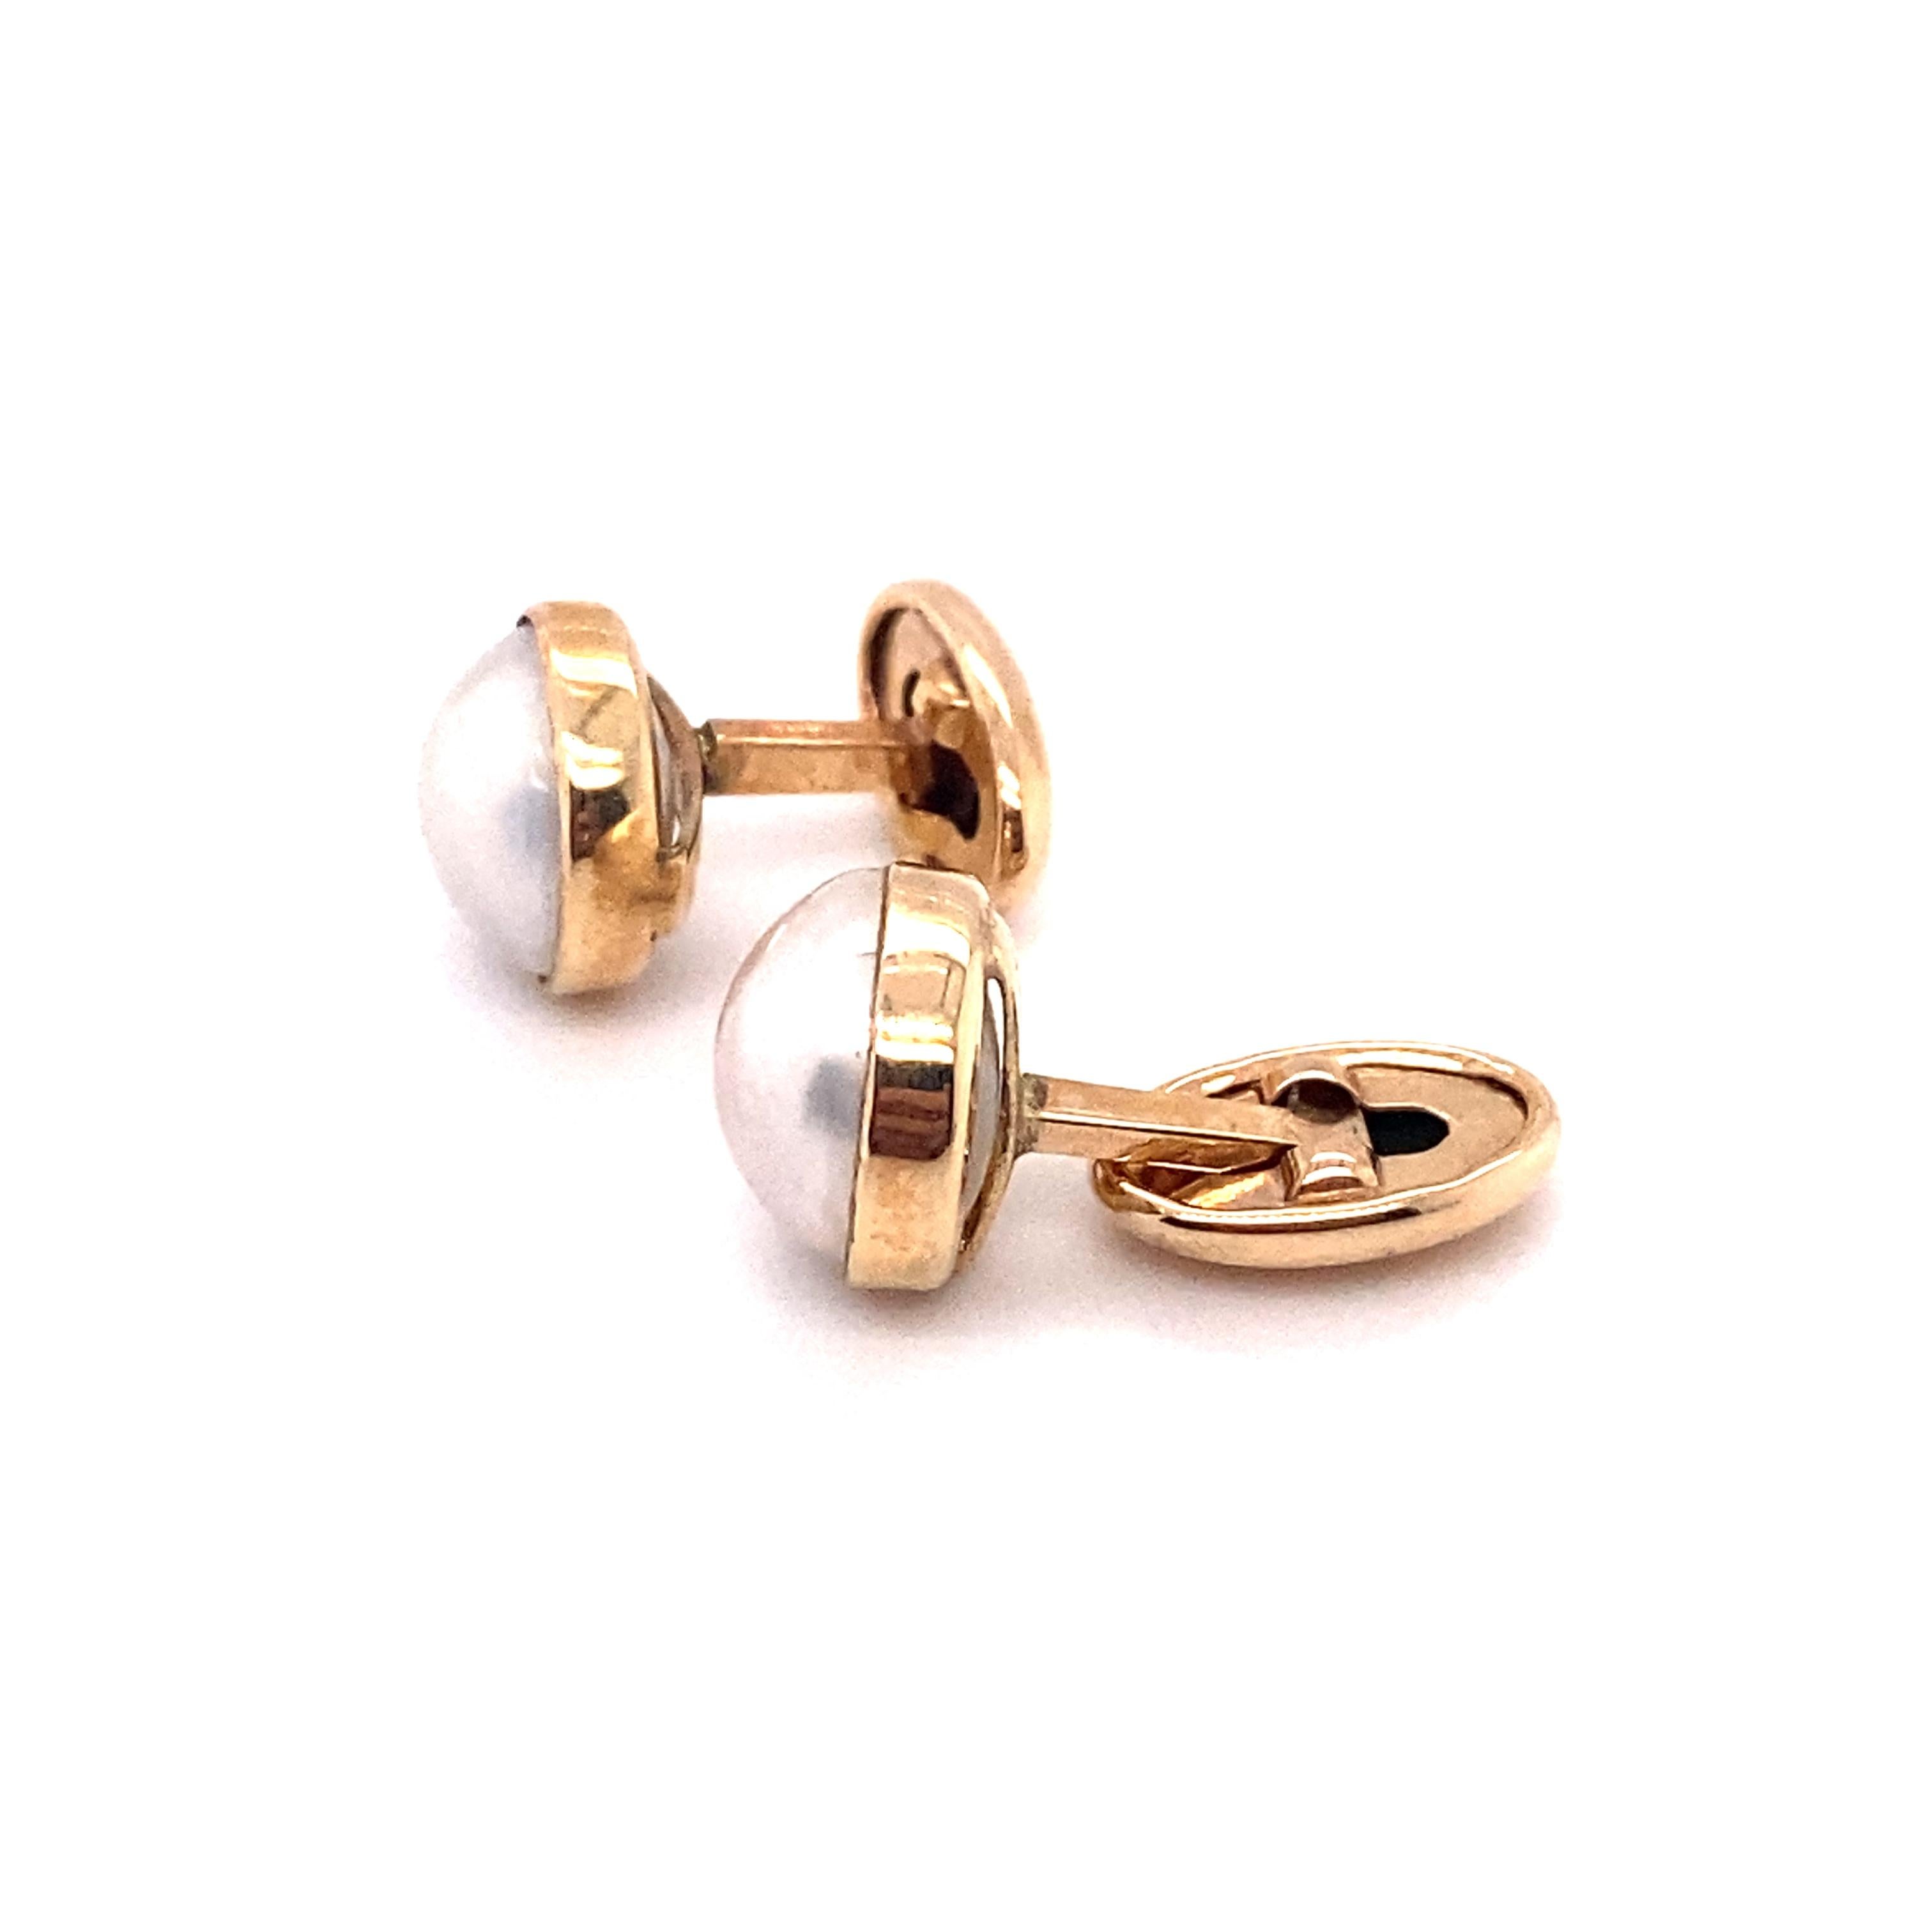 Cabochon Le Vian Mabe Pearl Cuff Links in 14K Gold